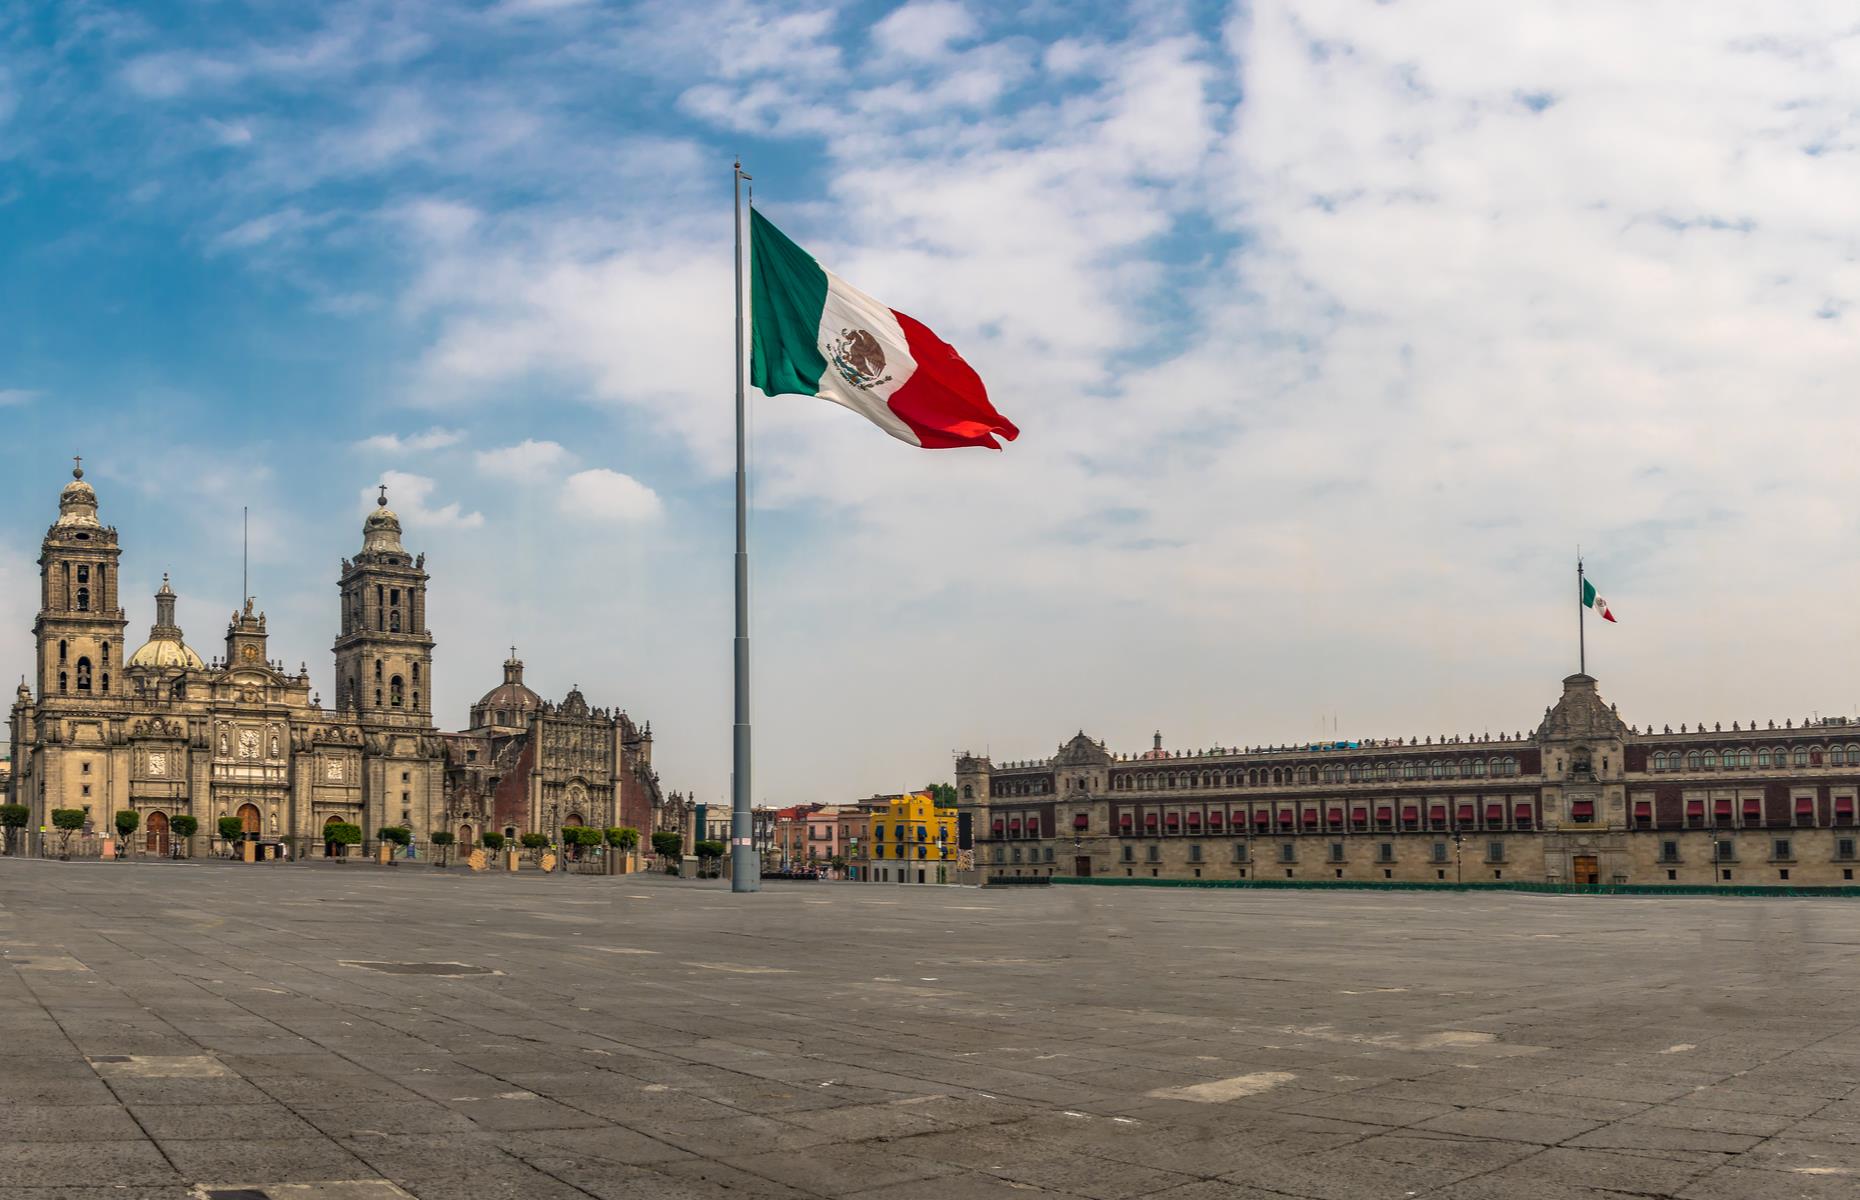 <p>Exuberant <em>Día de los Muertos</em> (Day of the Dead) celebrations in Mexico City’s grand Zócalo form a stunning backdrop for the dramatic opener of <em>Spectre</em> (2015). With its huge flagpole and imposing buildings, including the Metropolitan Cathedral and the National Palace, the vast plaza is at the heart of the historic district and just the place to start explorations. The nearby <a href="https://granhoteldelaciudaddemexico.com.mx/en/">Gran Hotel Ciudad de México</a> is where Bond slips into a hotel room with the mysterious Estrella (played by Mexican-American actor Stephanie Sigman) before giving chase across rooftops. It wasn’t the first time the Art Nouveau-hotel appeared in the franchise – it was also a location in <em>Licence to Kill</em> (1989).</p>